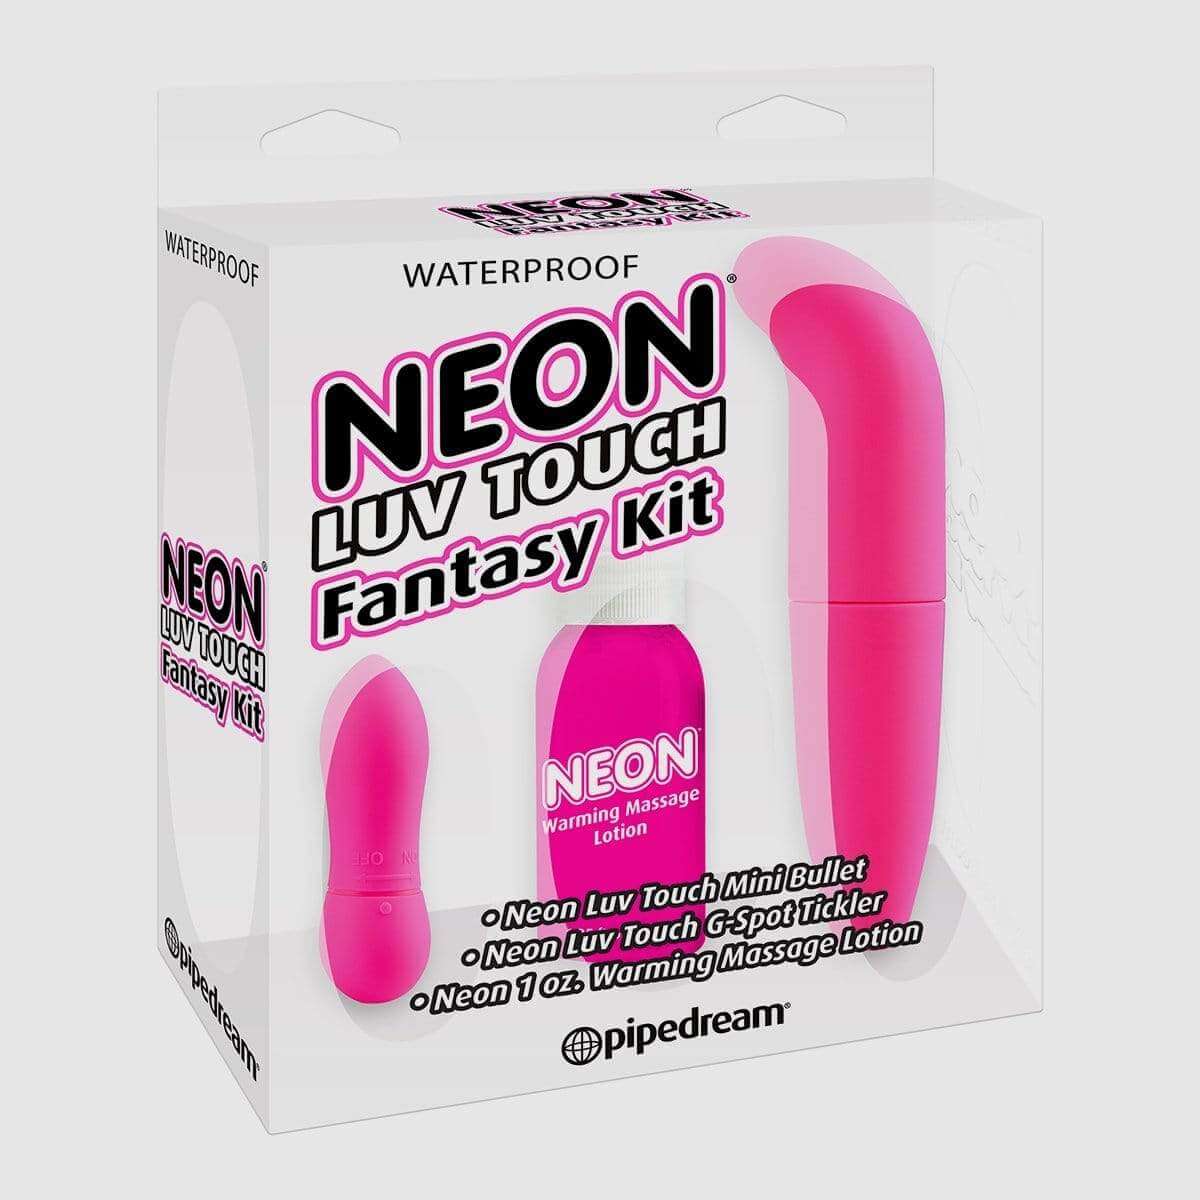 Neon Luv Touch Fantasy Kit - Pink - Thorn & Feather